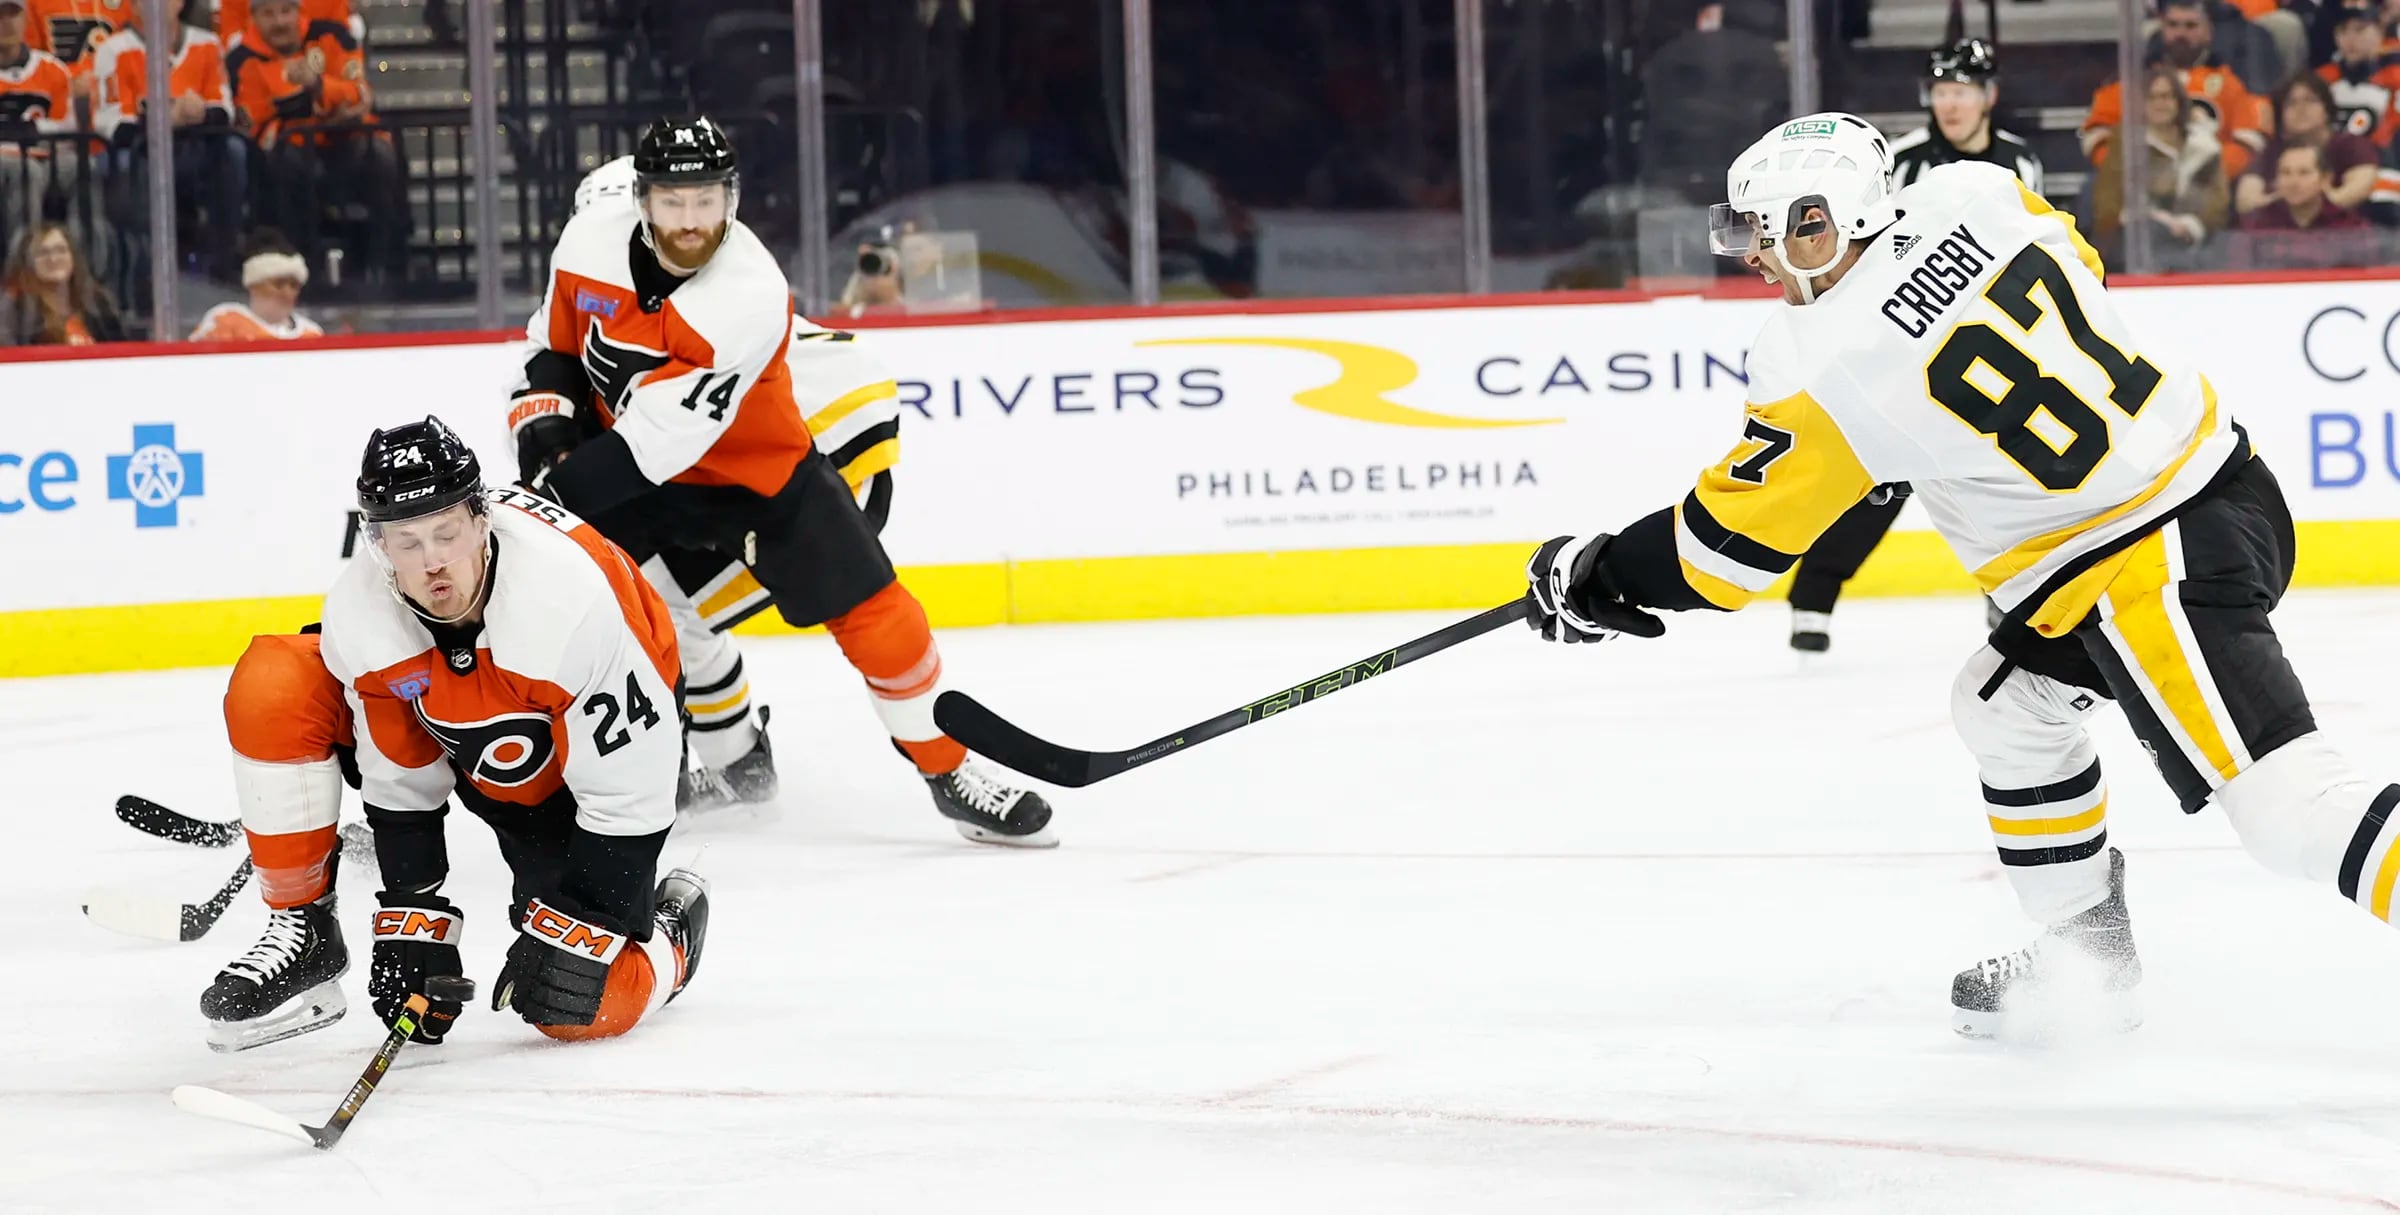 You won't need to twist Flyers fans' arms this weekend to root against Sidney Crosby and the Pittsburgh Penguins.